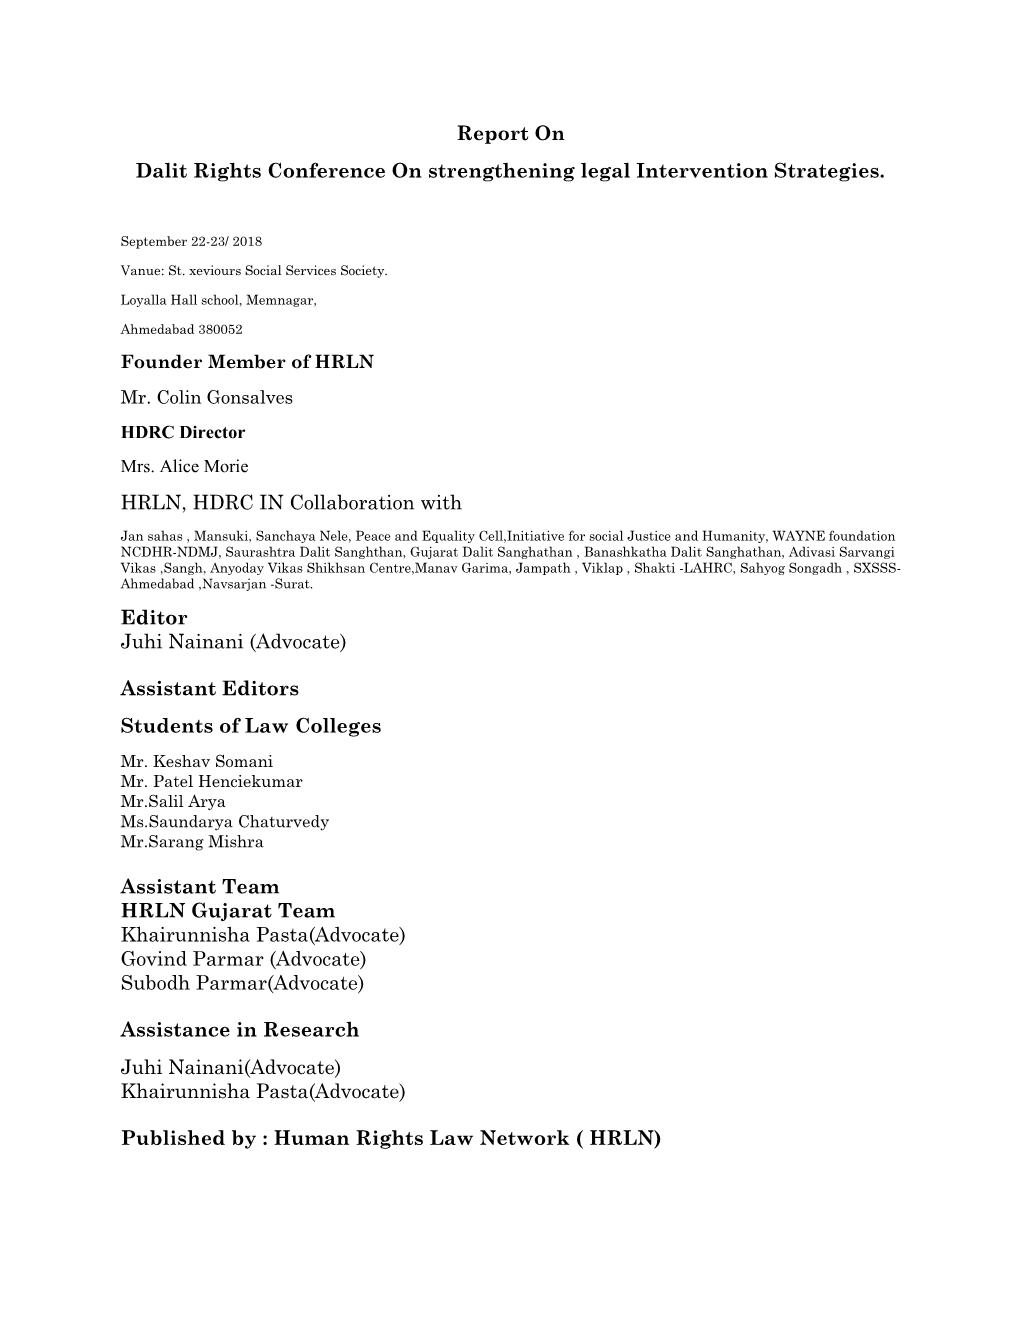 Report on Dalit Rights Conference on Strengthening Legal Intervention Strategies